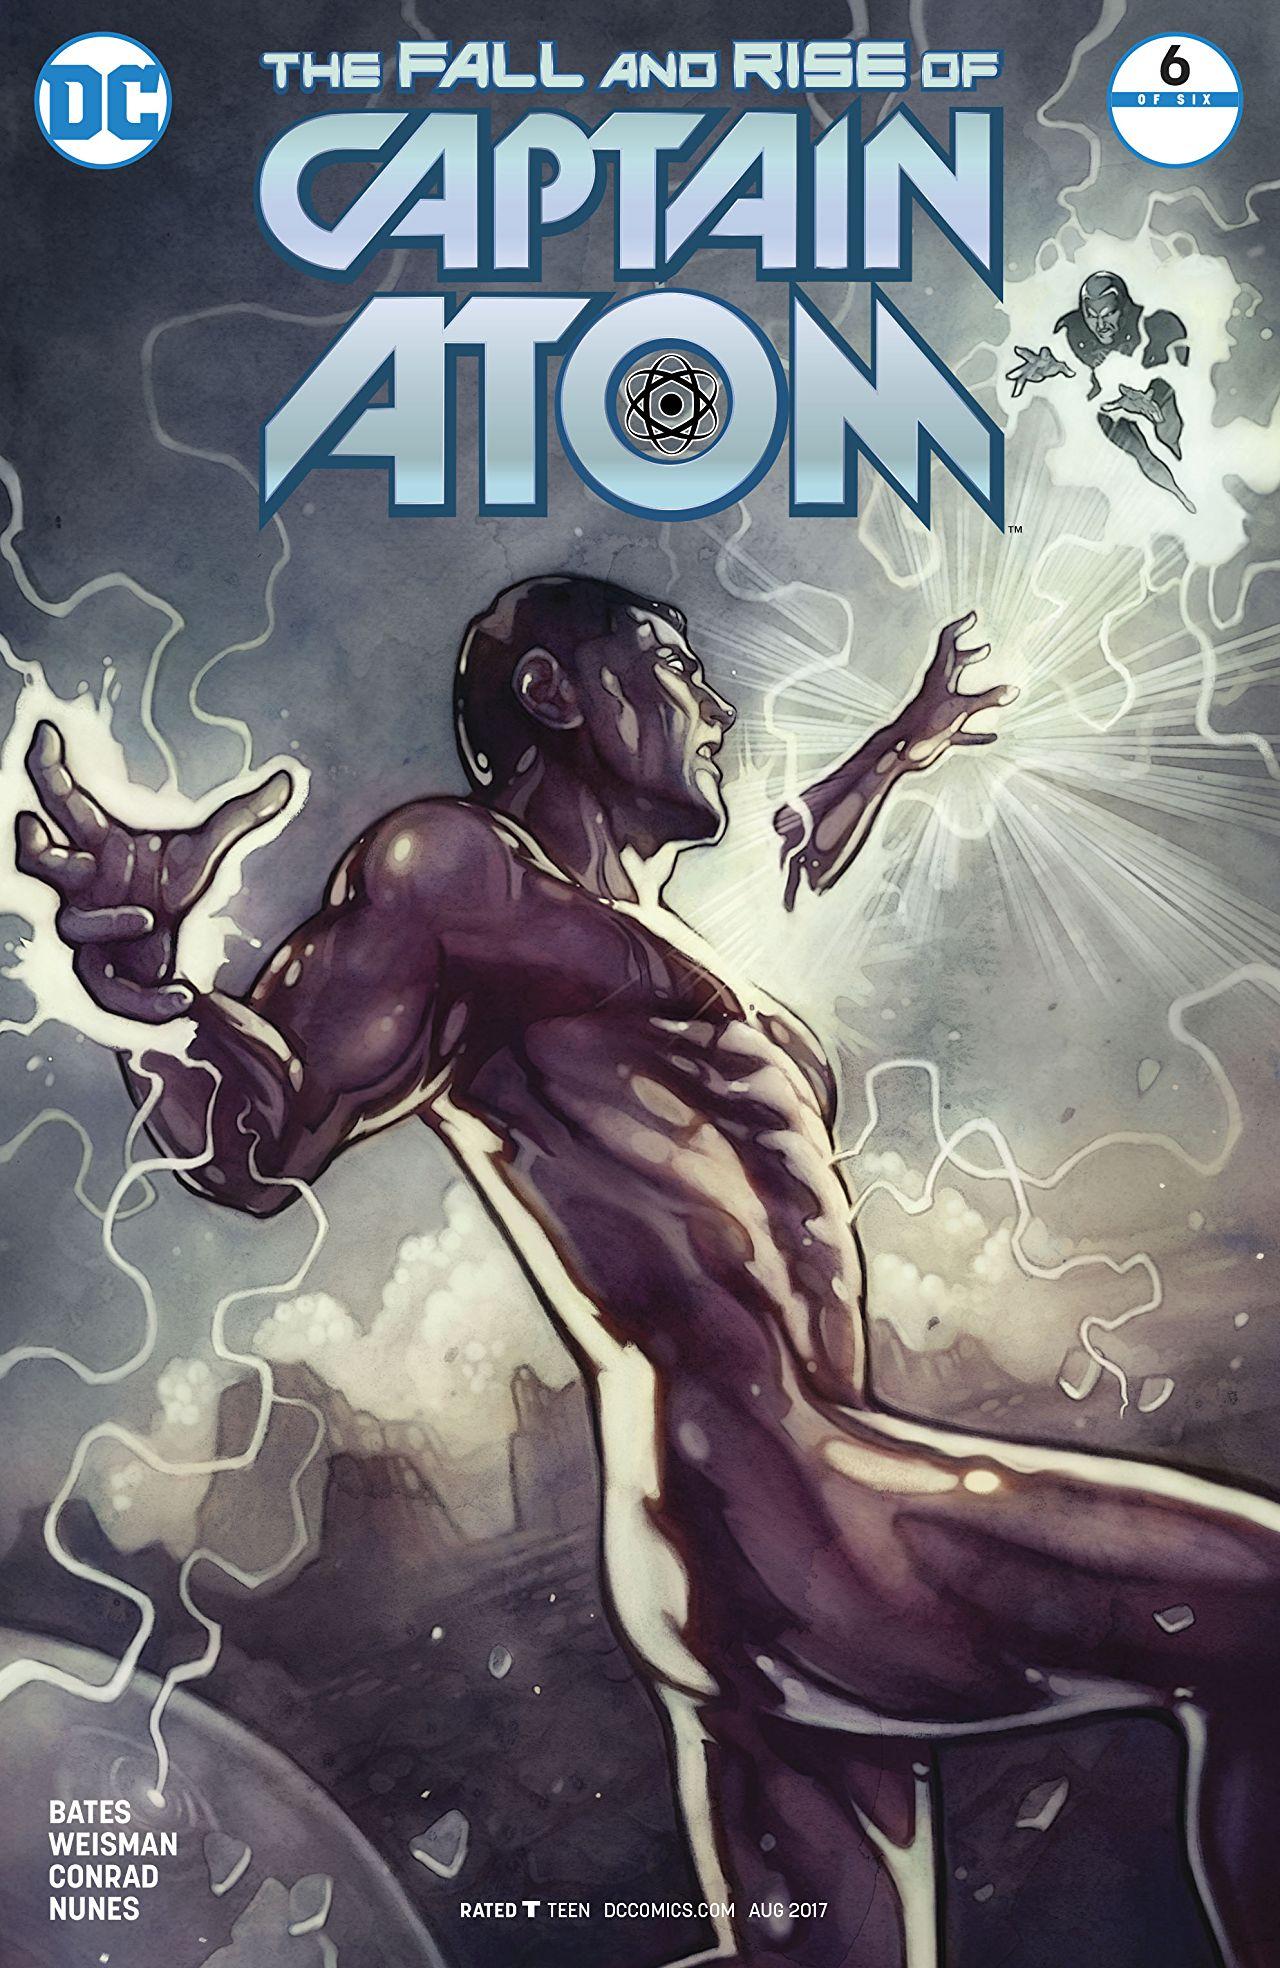 The Fall and Rise of Captain Atom Vol. 1 #6